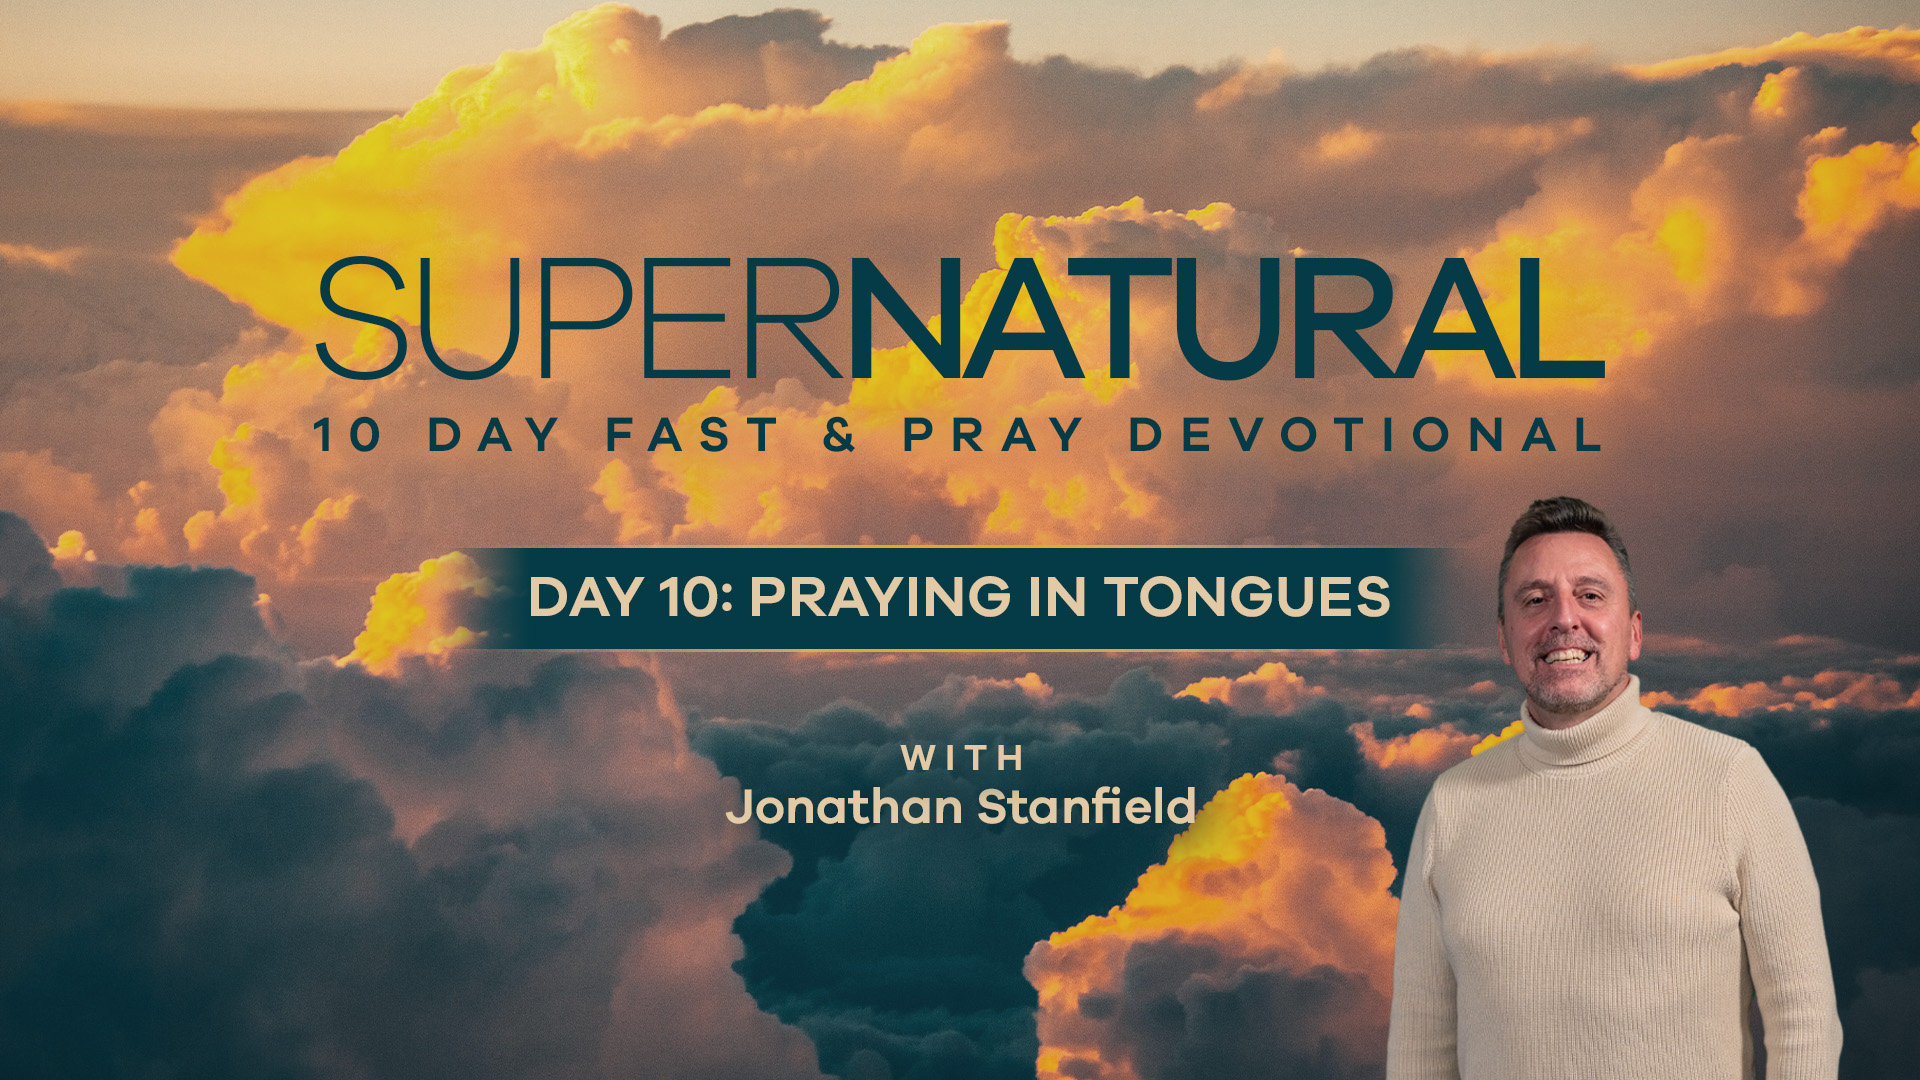 Video image for 'Day 10: Praying in Tongues'' of the 10-Day Supernatural Devotional about praying in tongues.